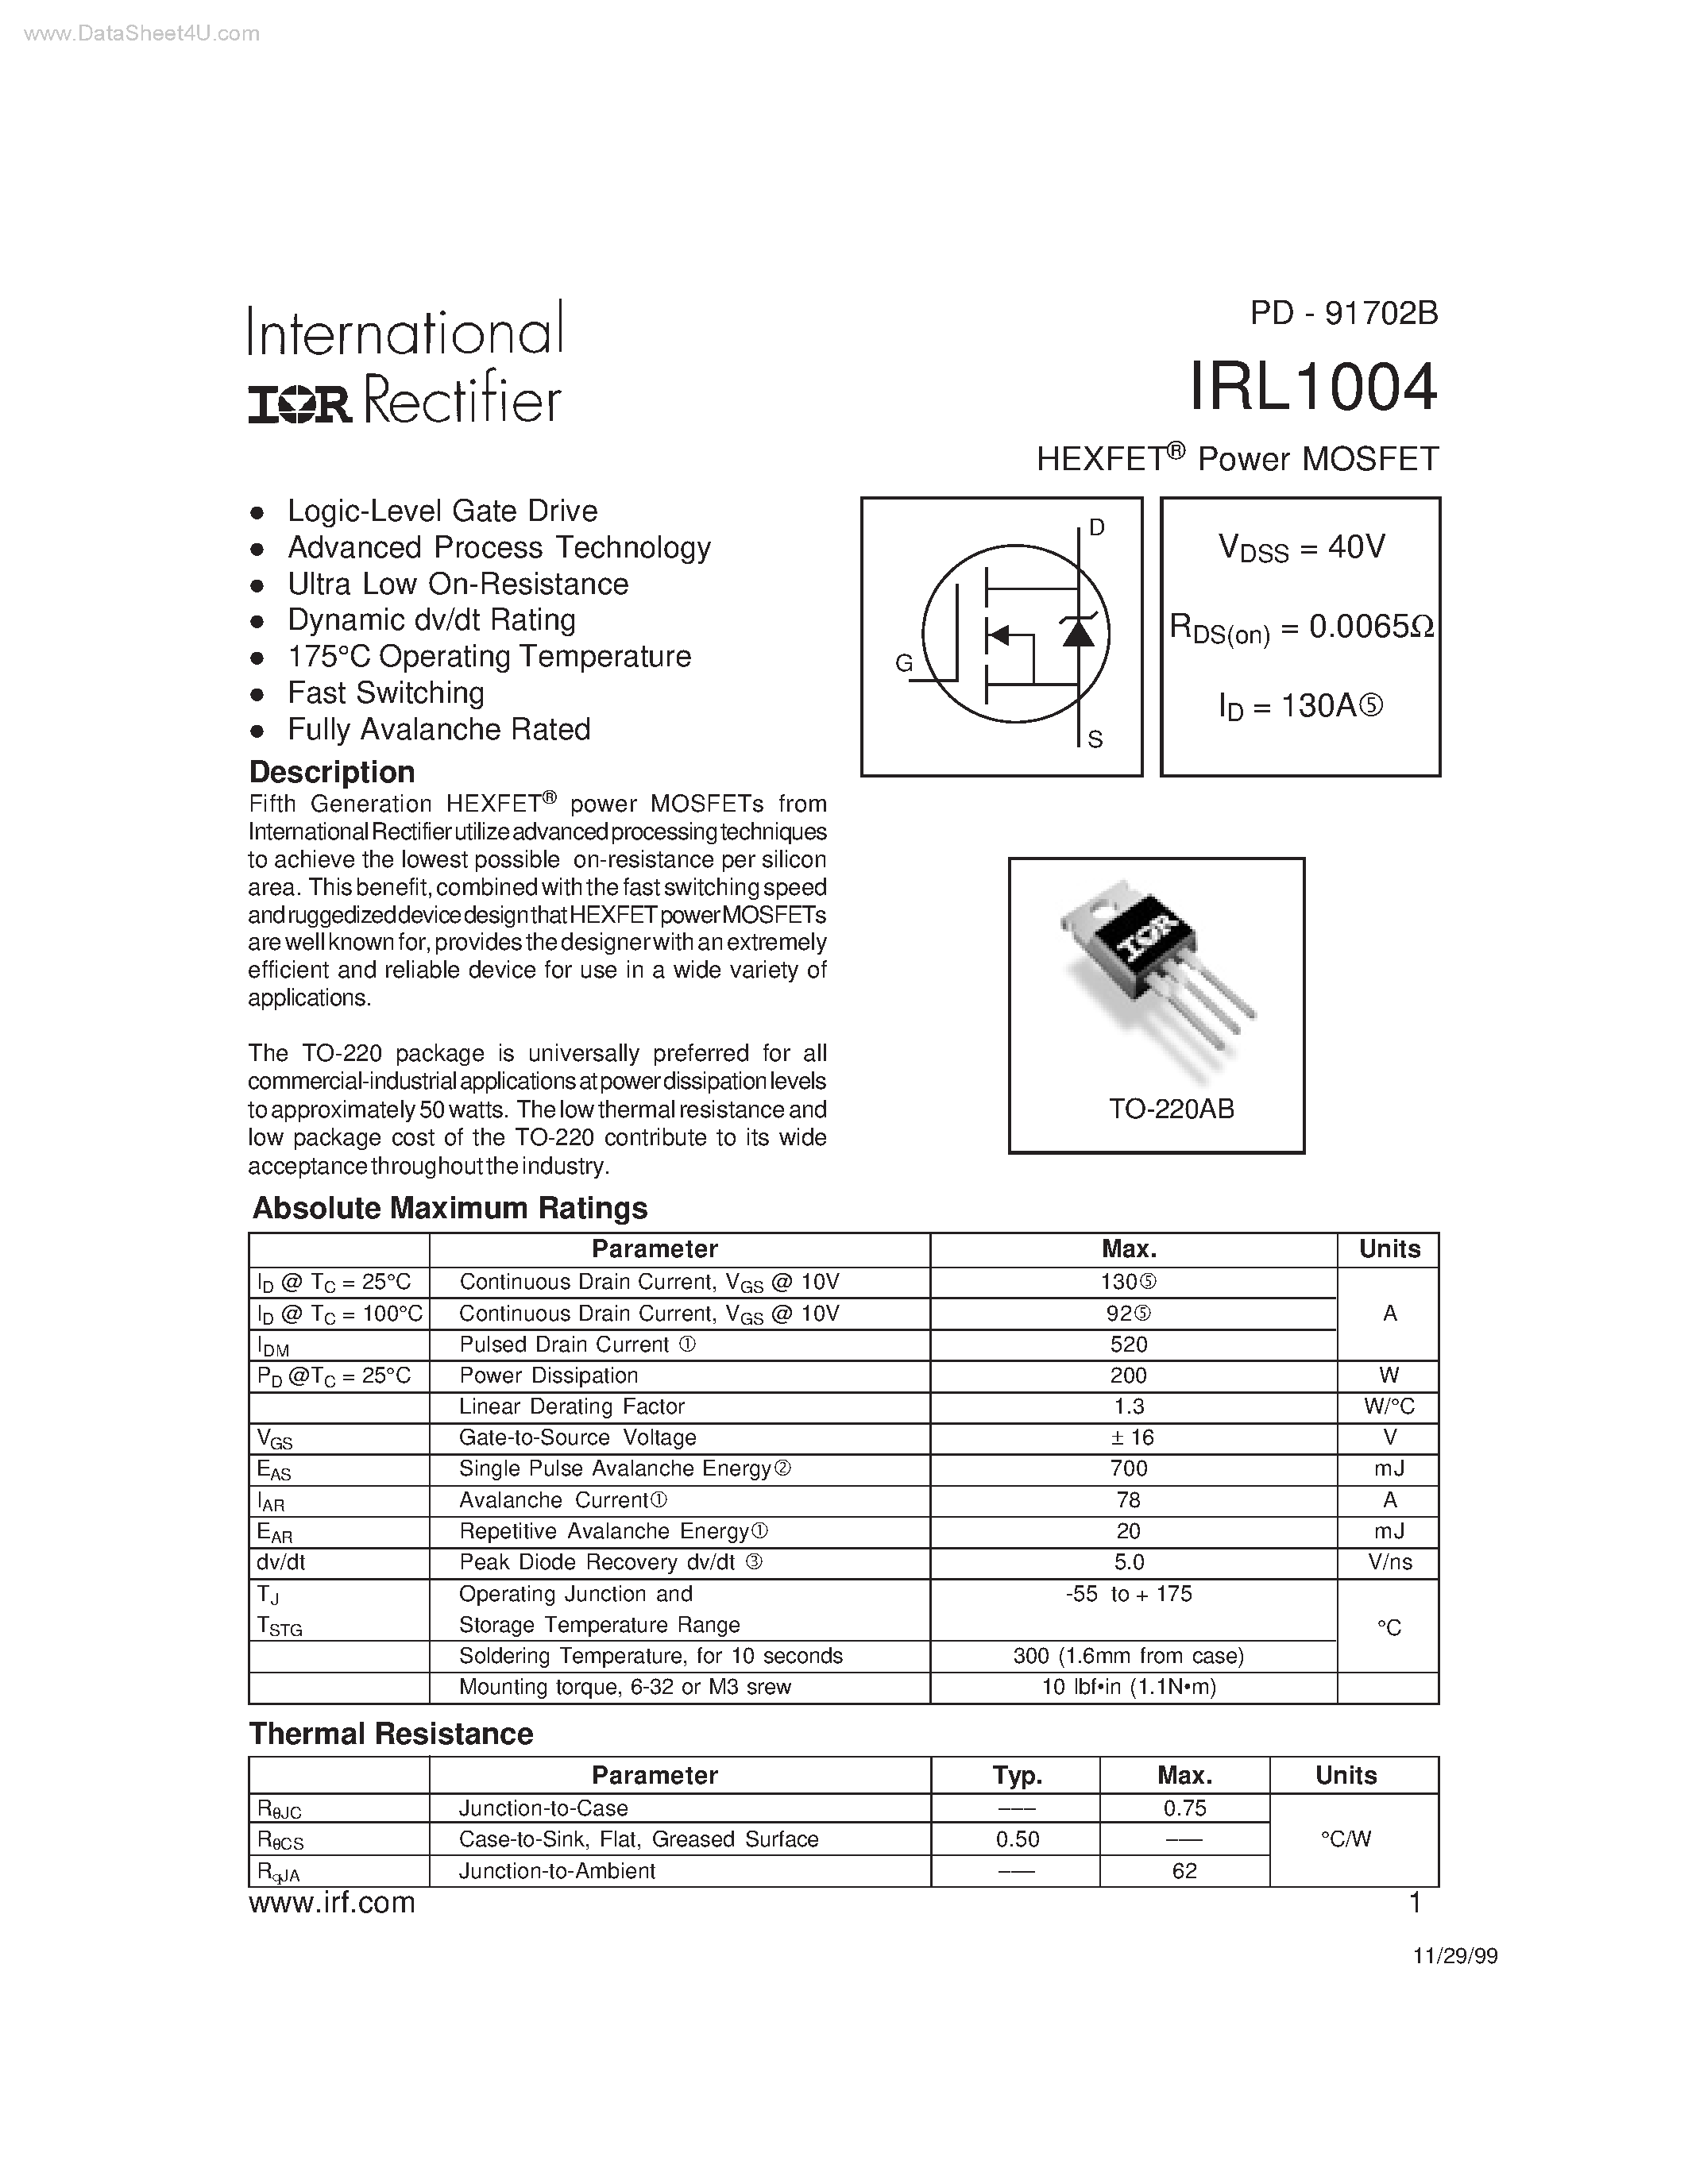 Datasheet IRL1004 - HEXFET Power MOSFET page 1